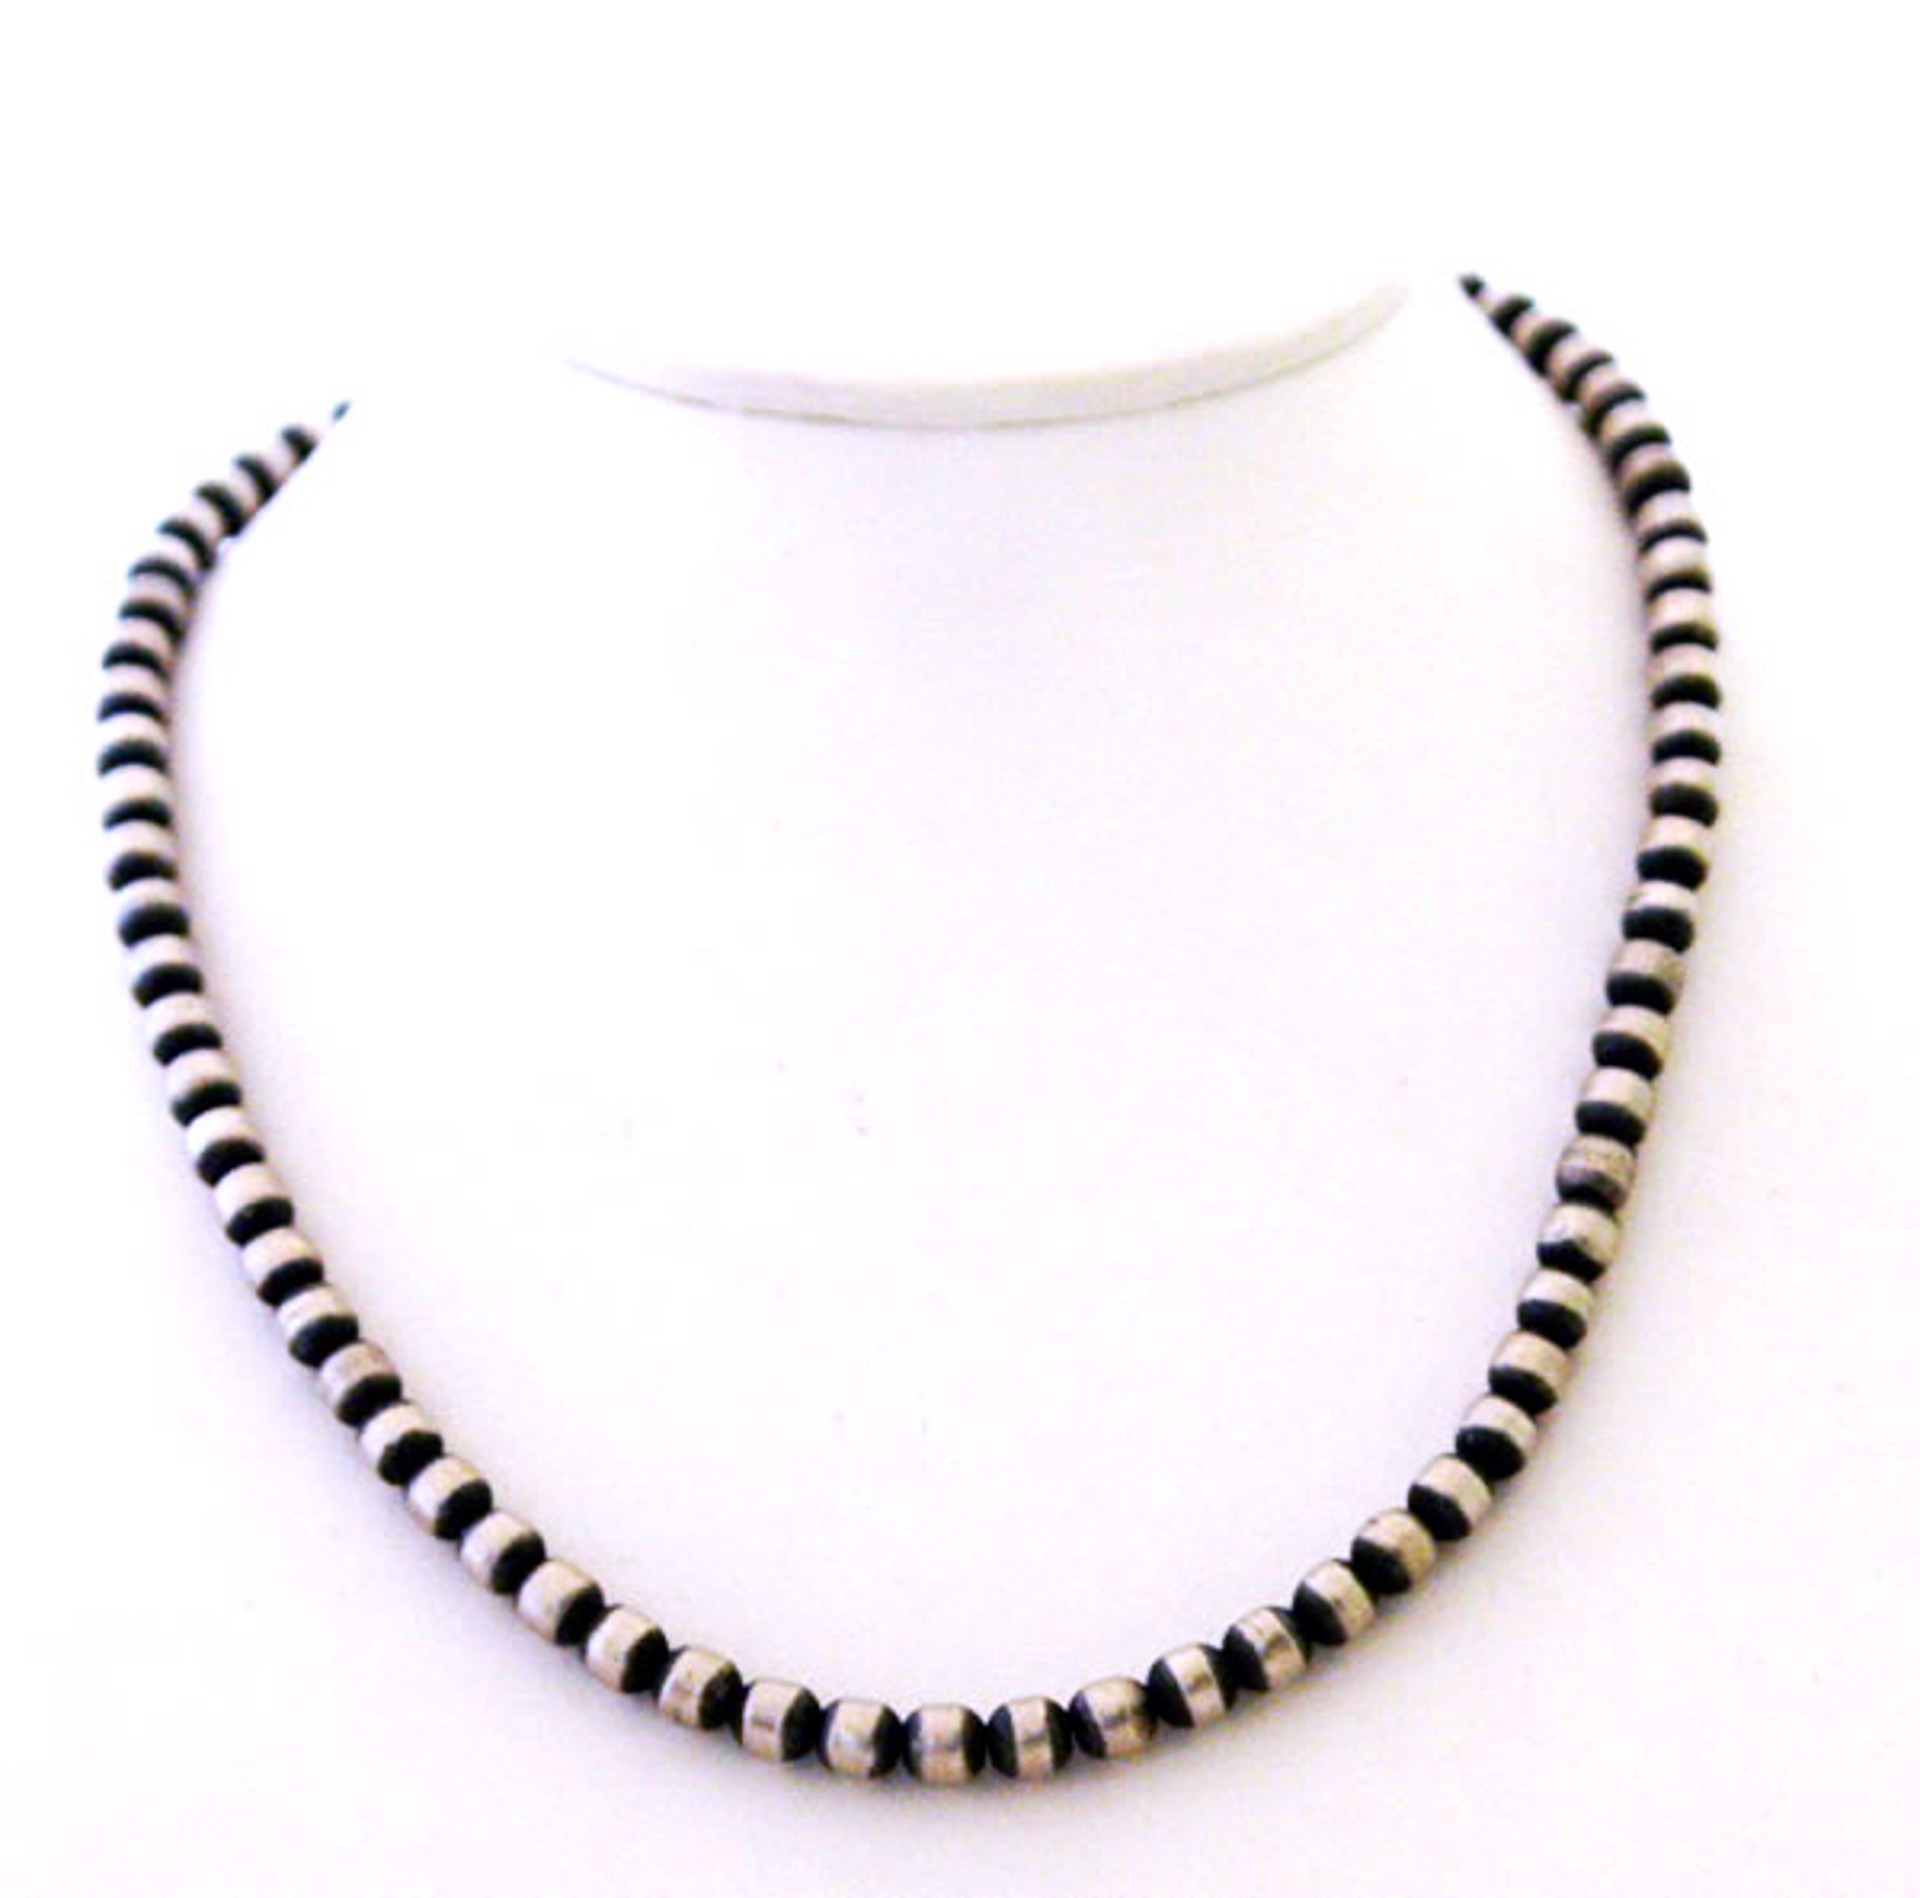 Necklace - 16-19" Single Strand Antiqued Silver Beads 6MM by Dan Dodson